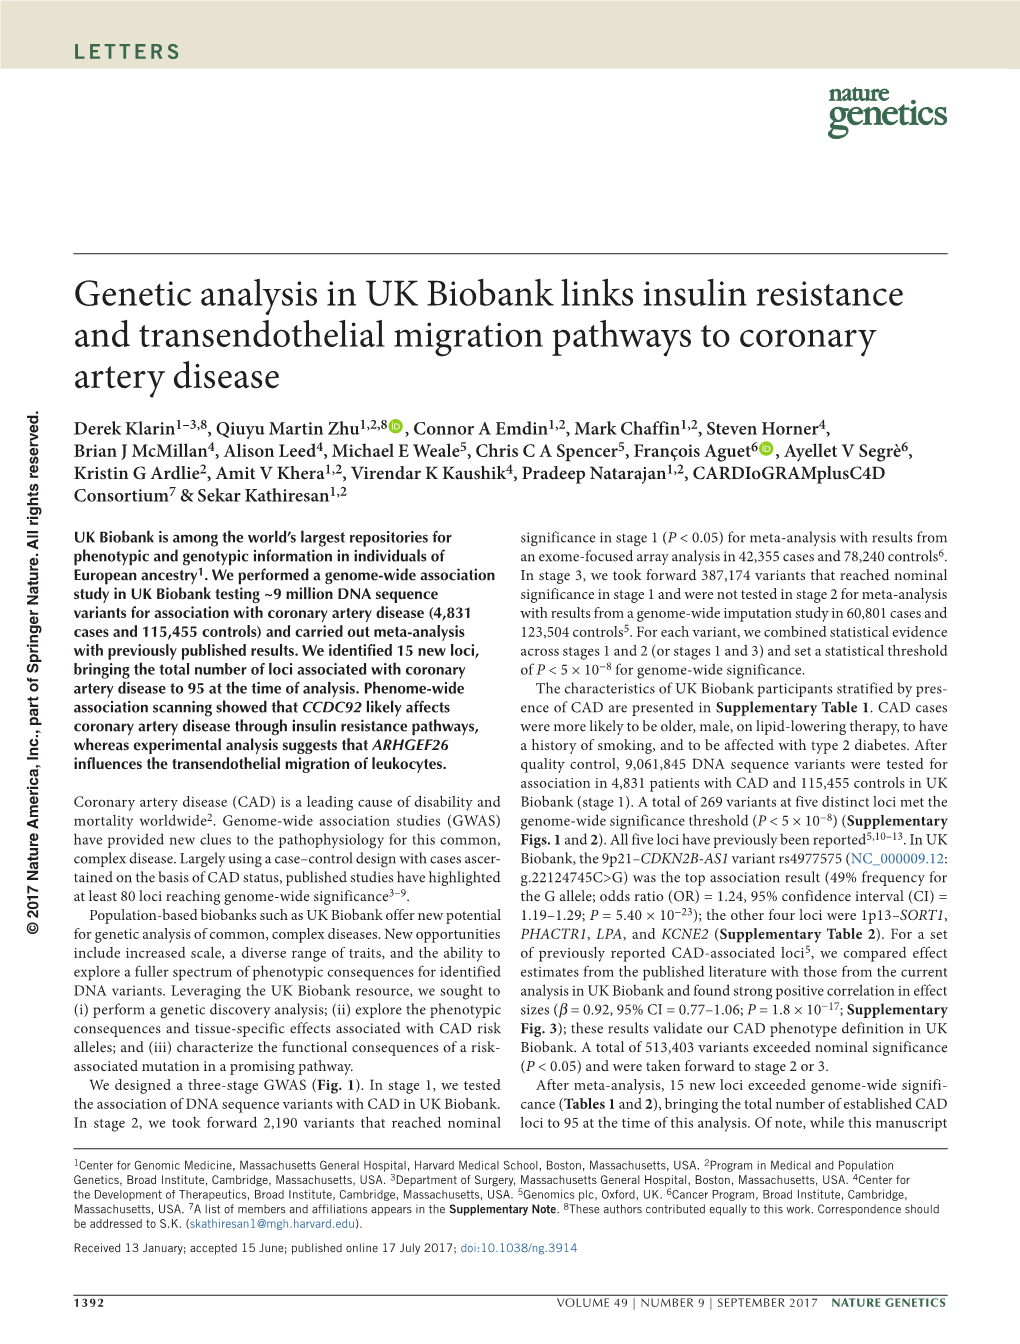 Genetic Analysis in UK Biobank Links Insulin Resistance and Transendothelial Migration Pathways to Coronary Artery Disease